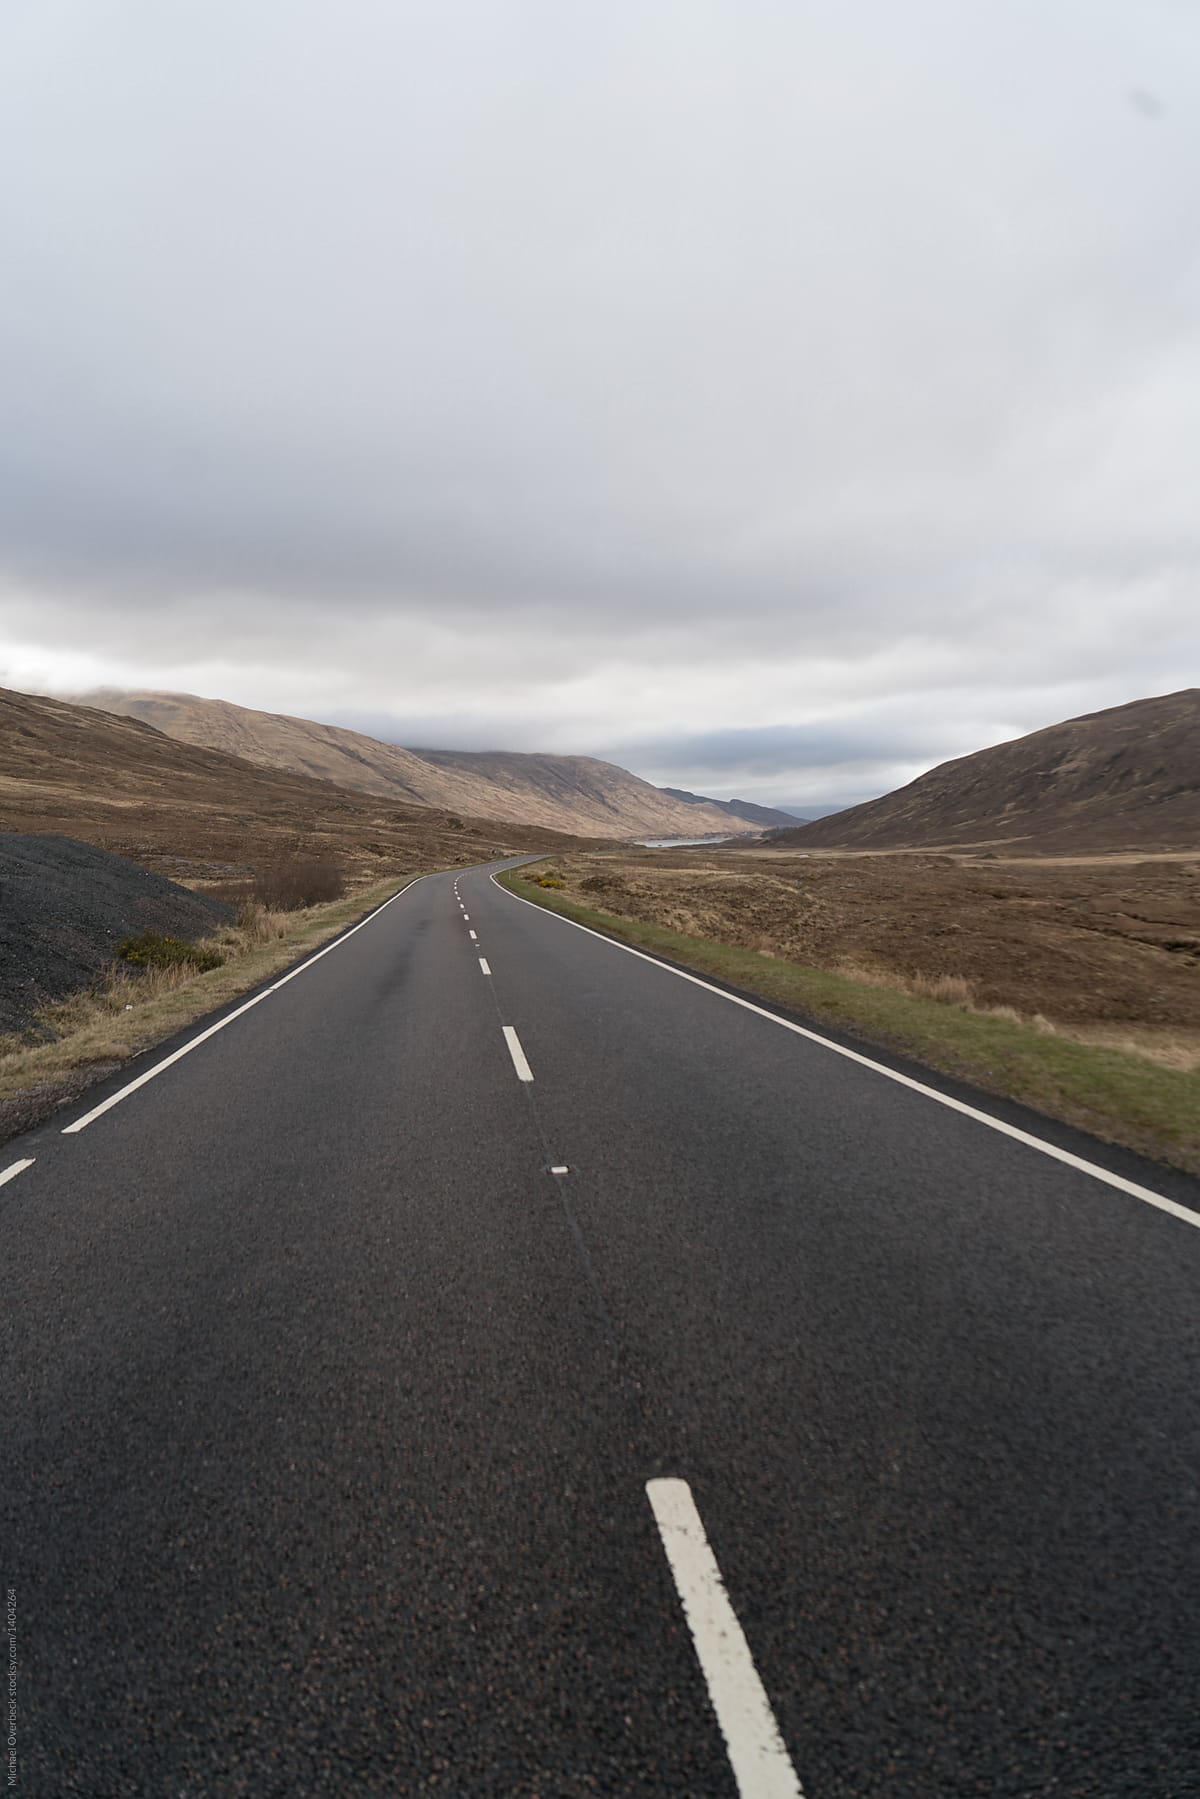 The Road to Skye